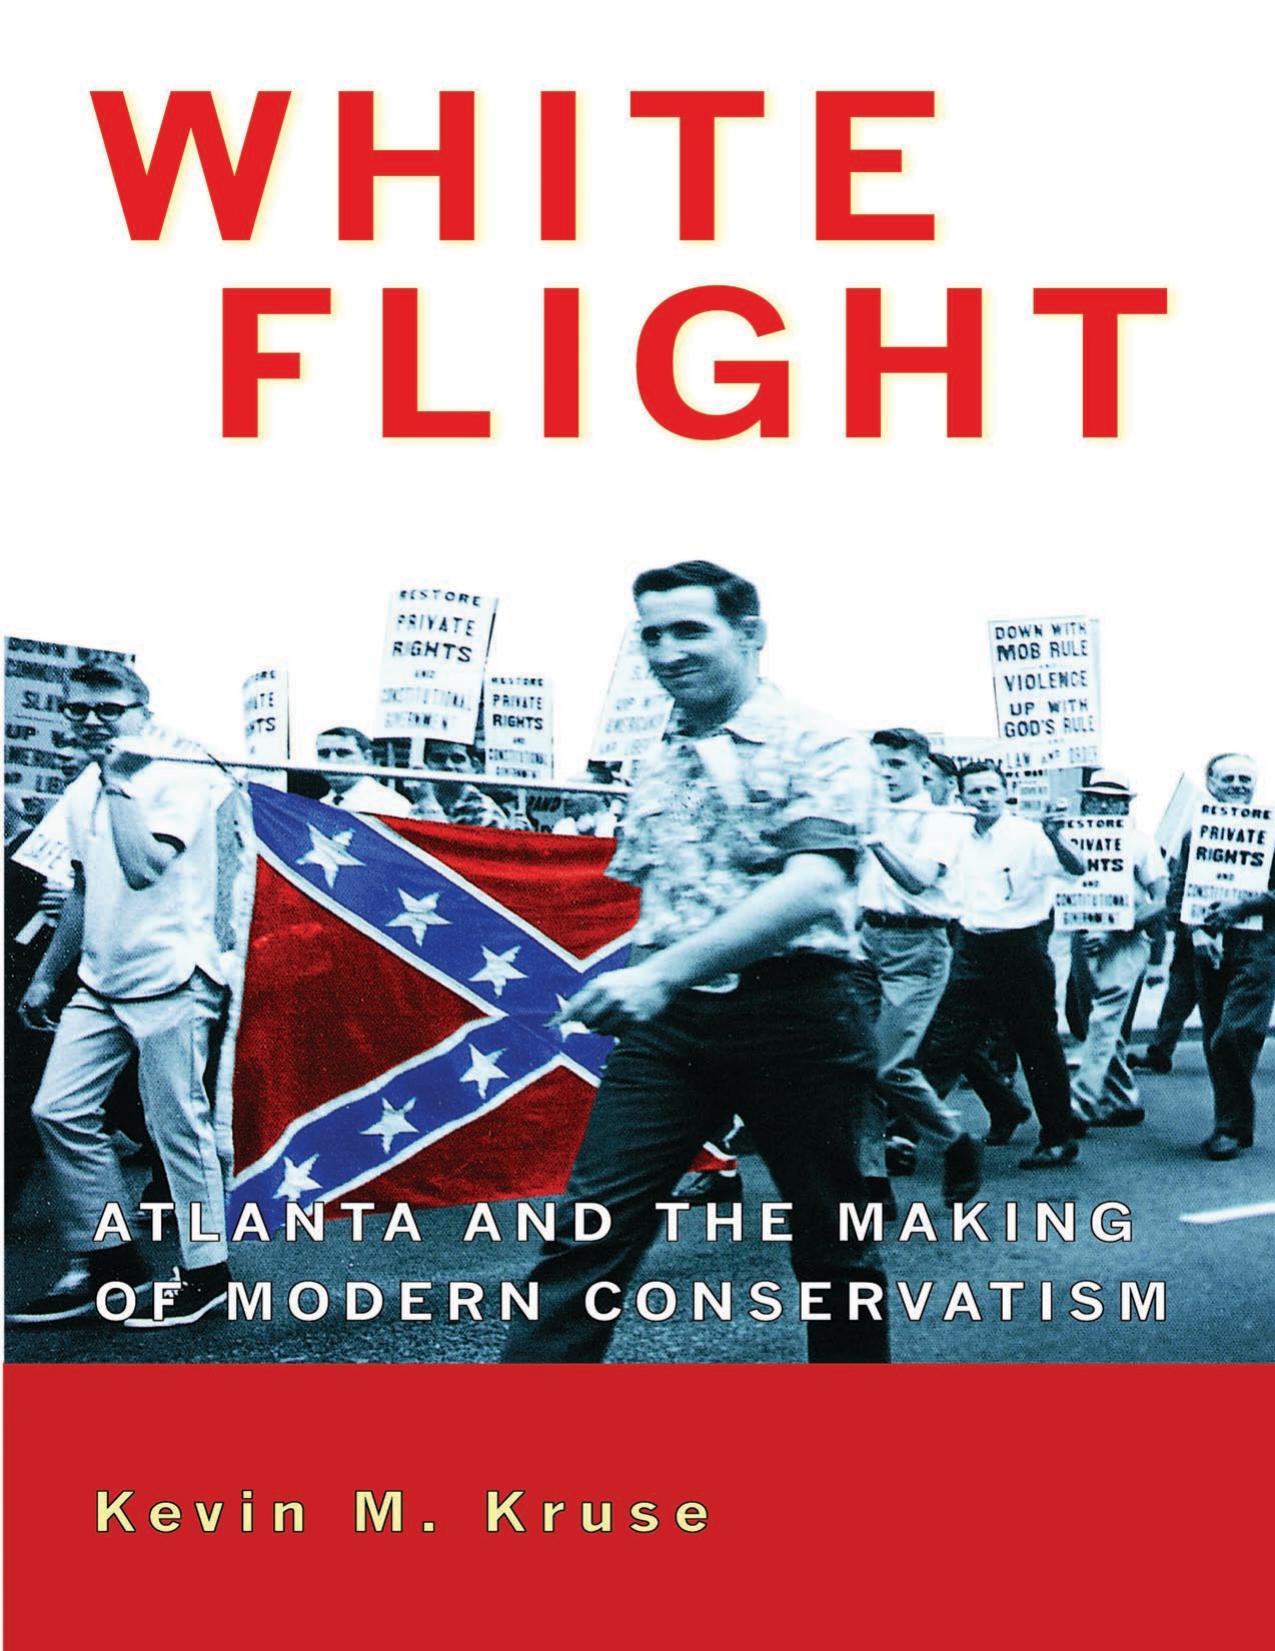 White Flight: Atlanta and the Making of Modern Conservatism by Kevin M. Kruse